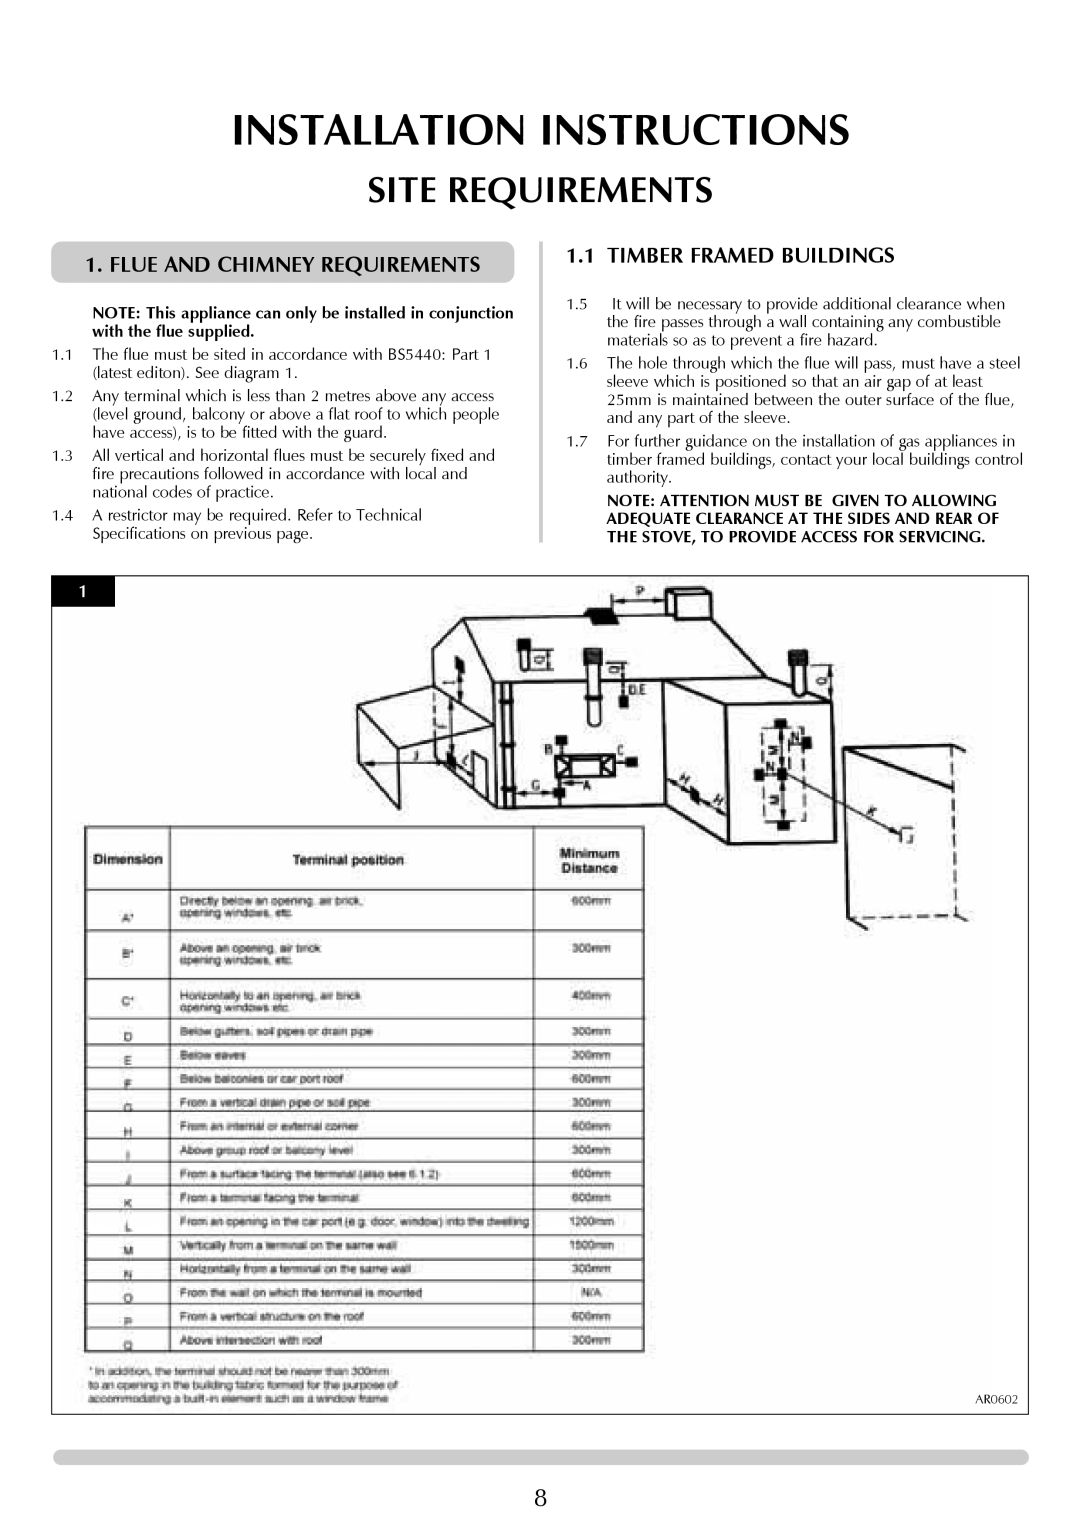 Stovax Ceramica Manhattan Wood Stove manual Site Requirements, Installation Instructions, Flue And Chimney Requirements 